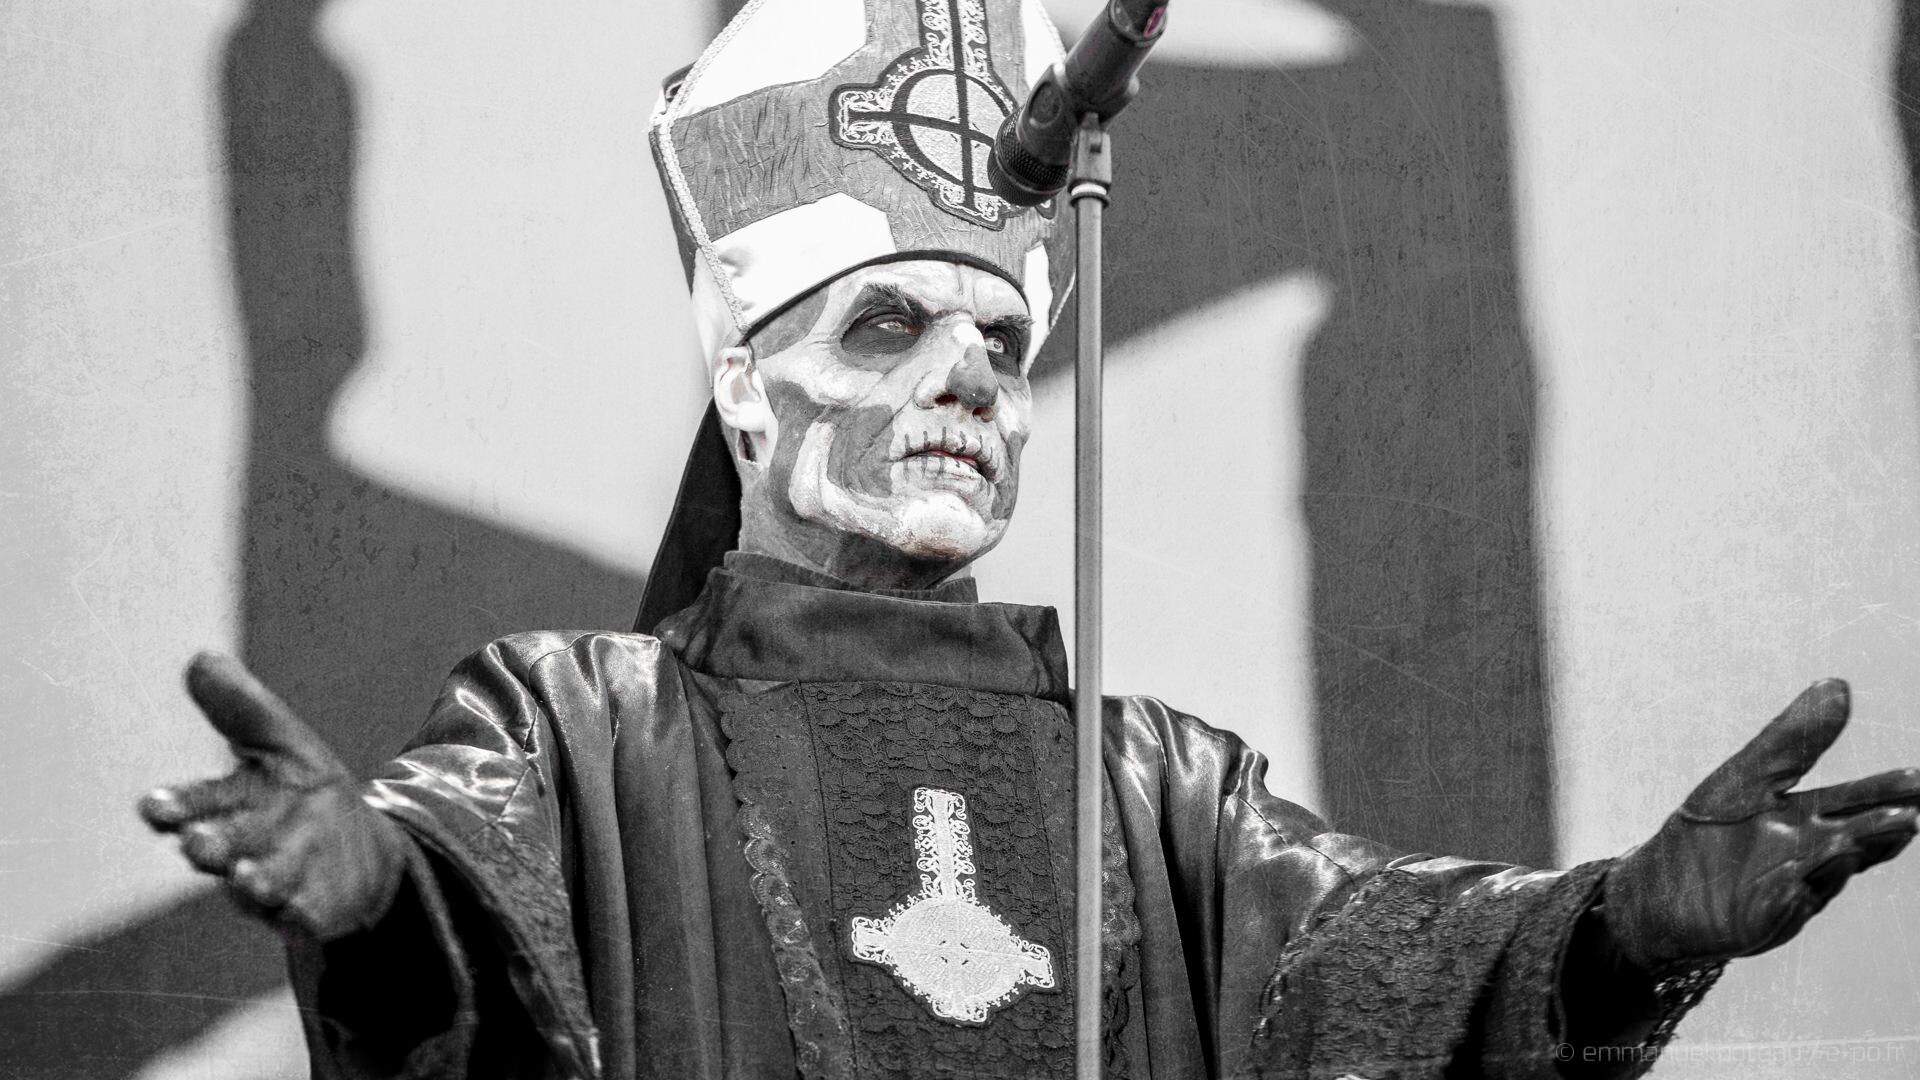 Ghost (Band): The band introduced a new character, Papa Emeritus IV, in March 2020. 1920x1080 Full HD Wallpaper.